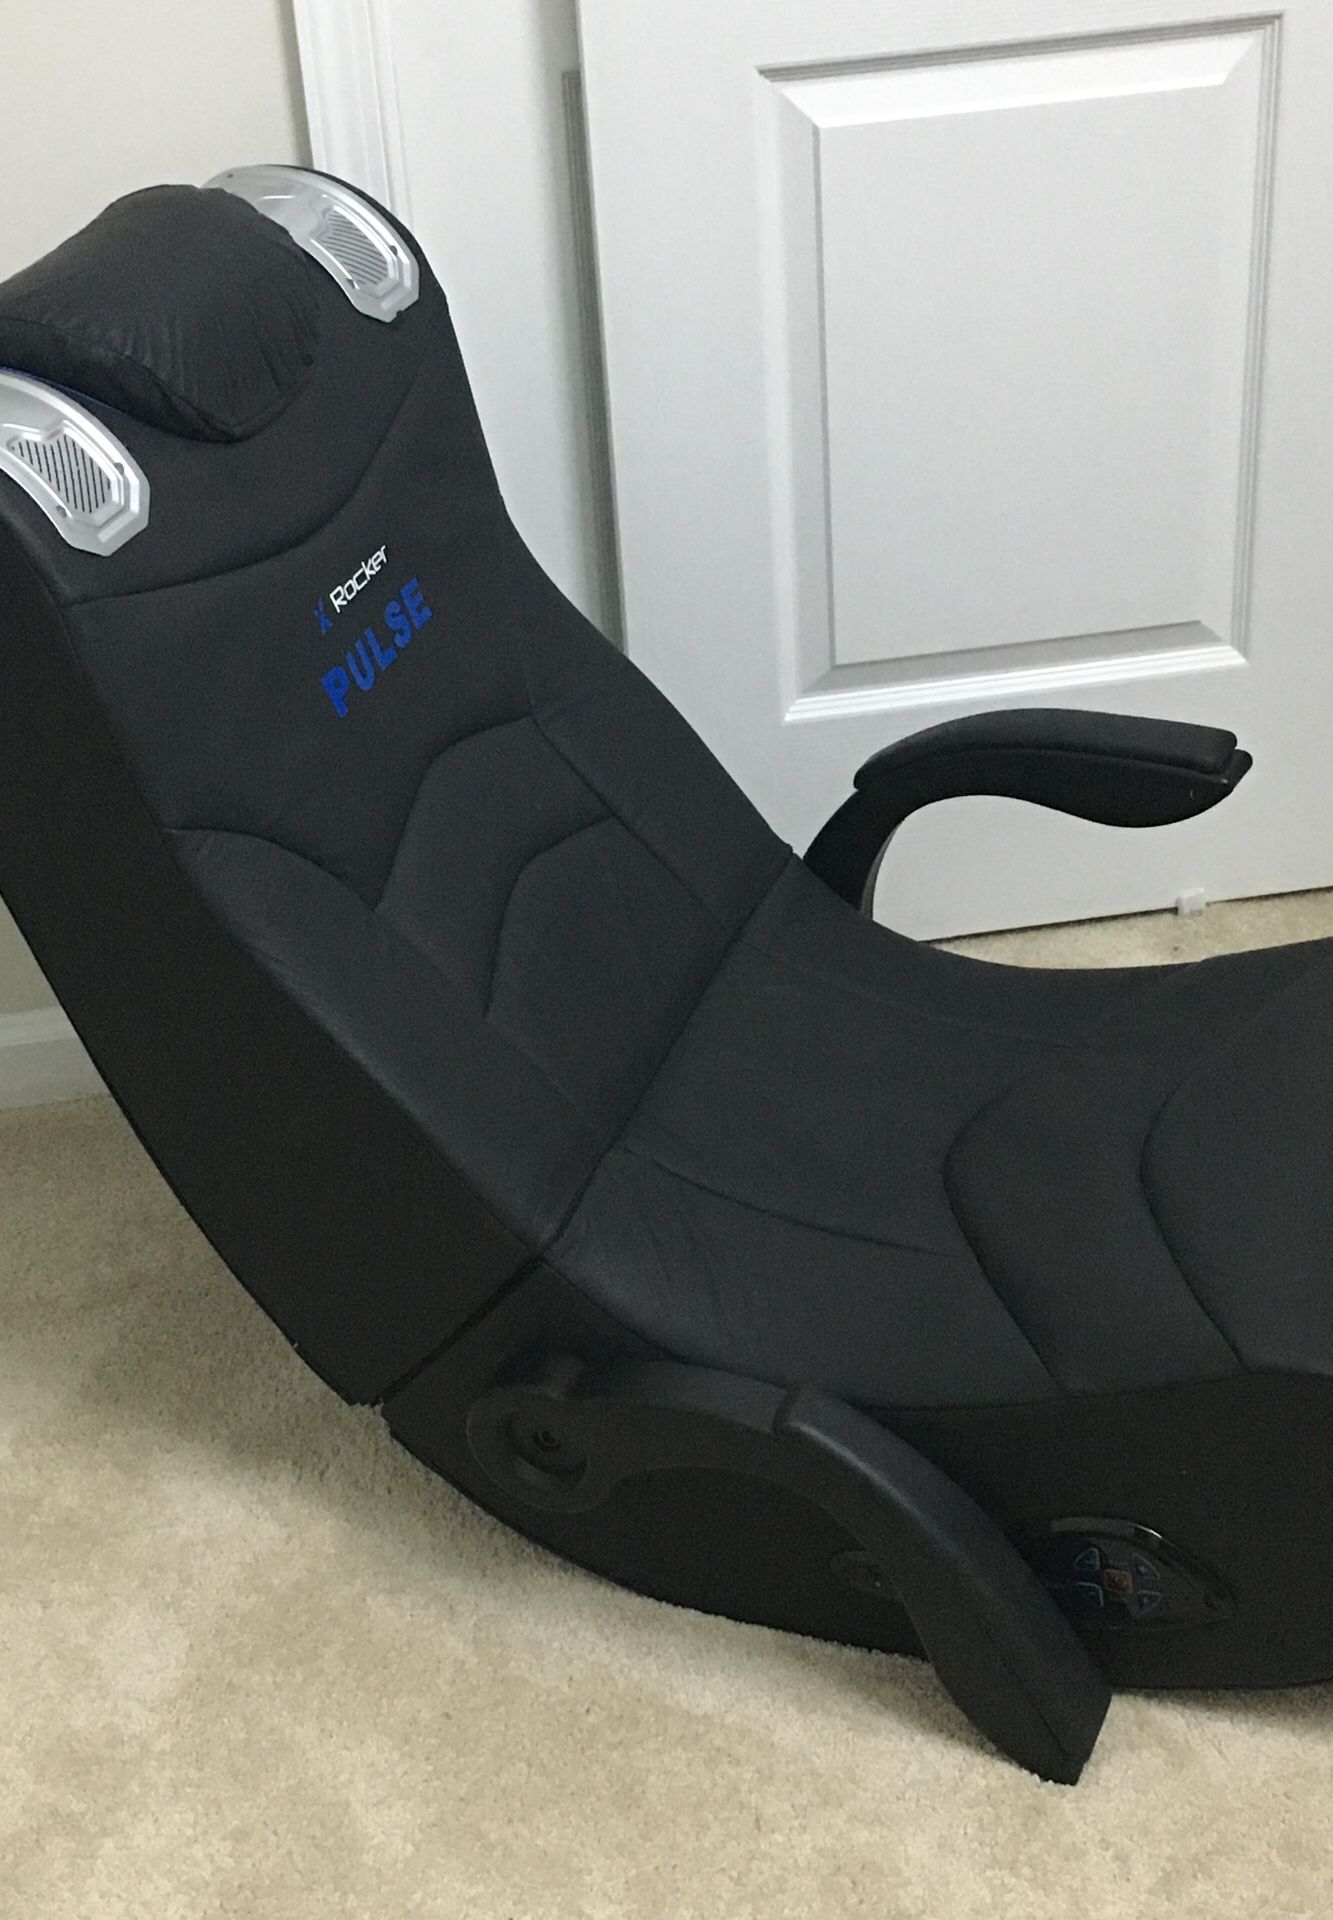 Gaming chair. Very comfortable and compatible